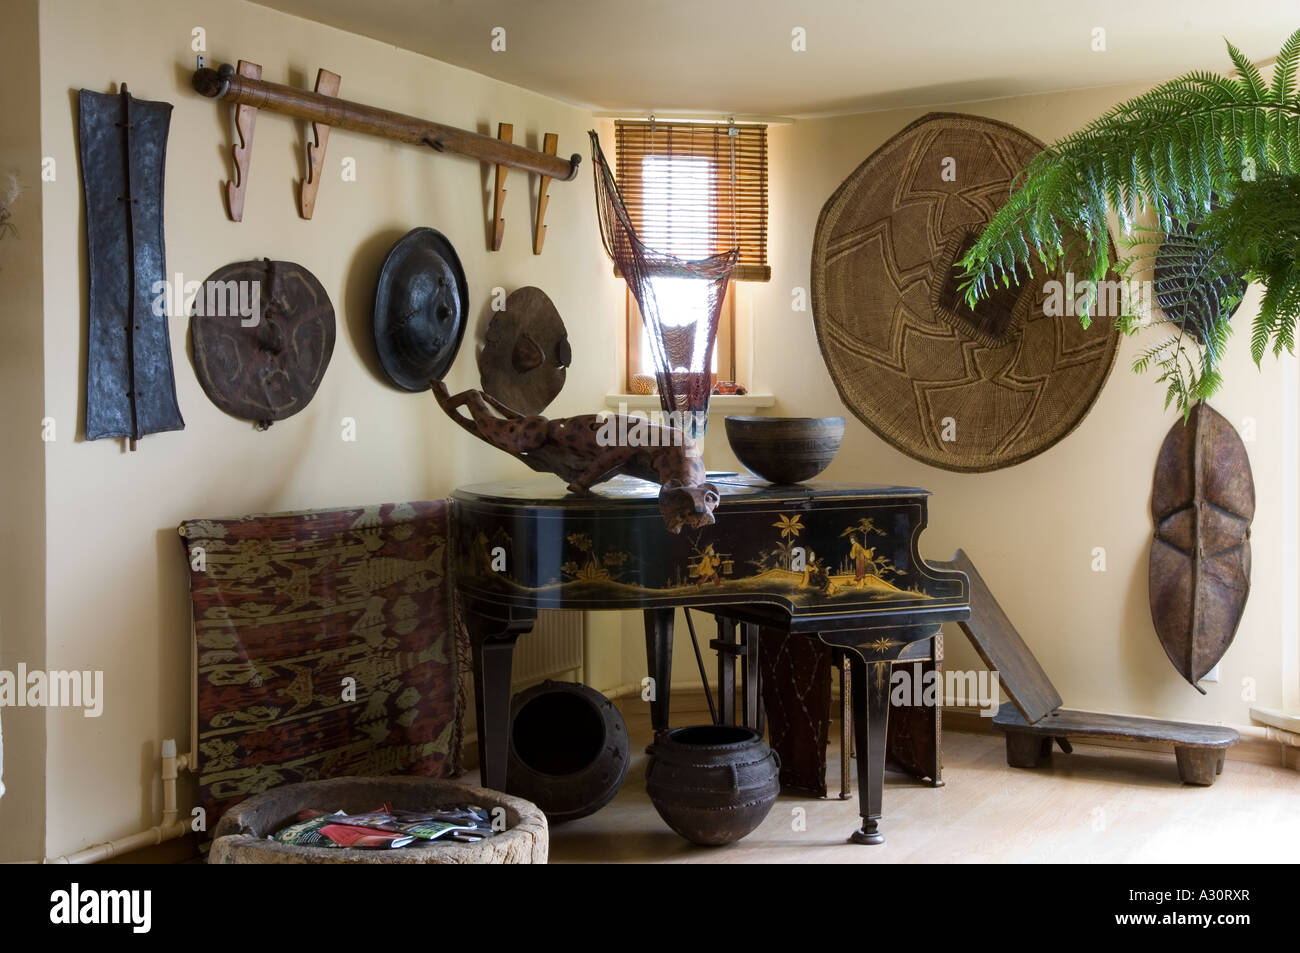 Corner of a room with baby grand piano and African art objects Stock Photo